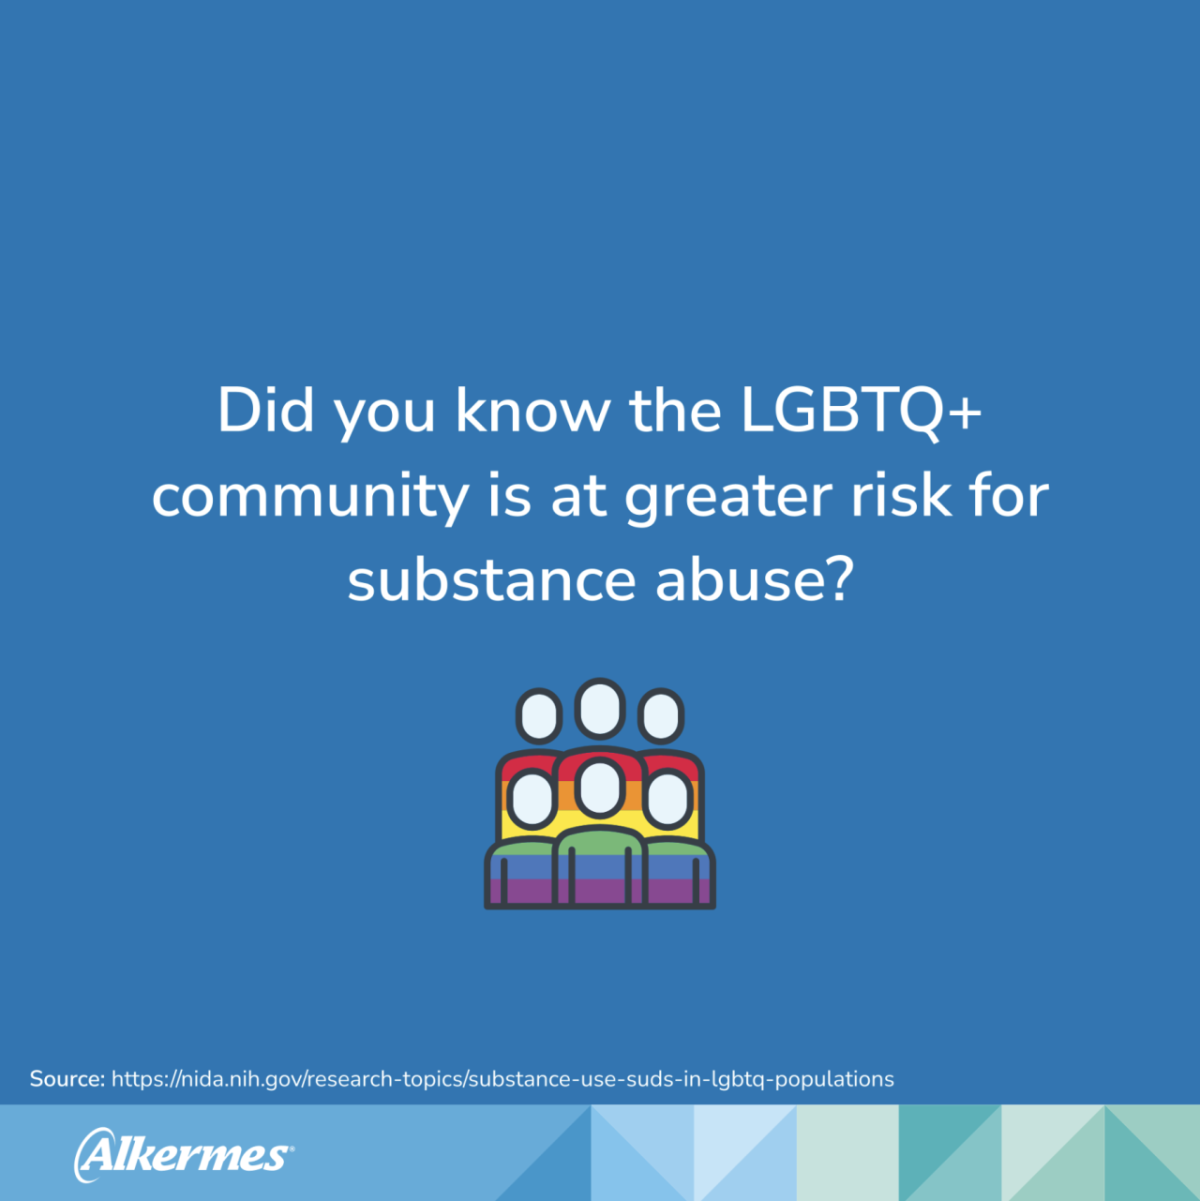 PDF slide with the text "Did you know the LGBTQ+ community is at greater risk for substance abuse?" Source: https://nida.nih.gov/research-topics/substance-use-suds-in-lgbtq-populations